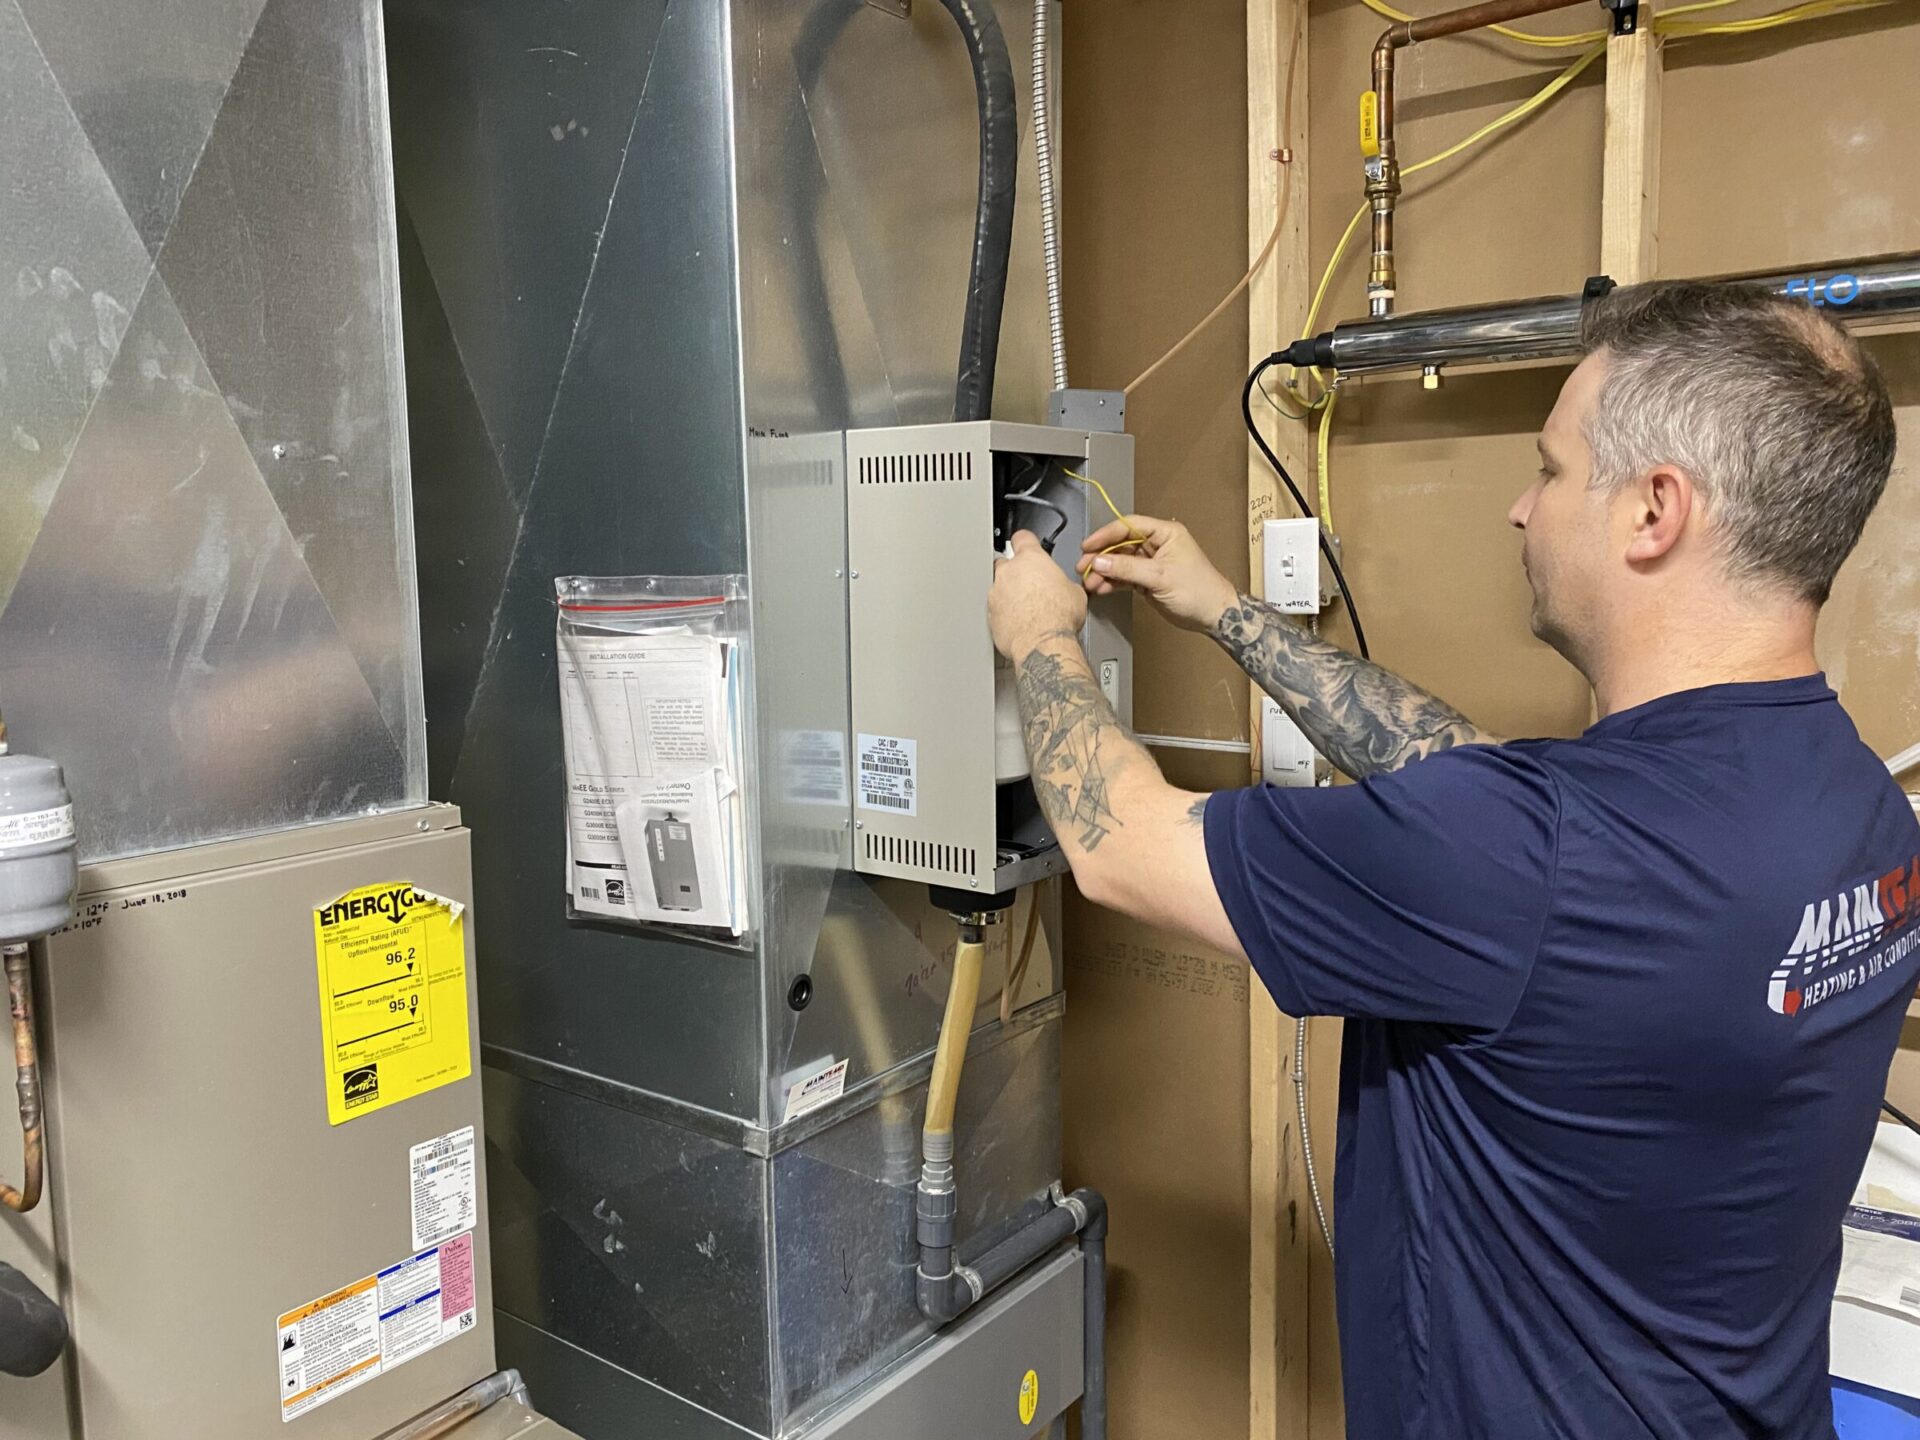 A person with tattoos is working on an HVAC system in a utility room, using a screwdriver. Visible equipment includes ductwork and water heaters.